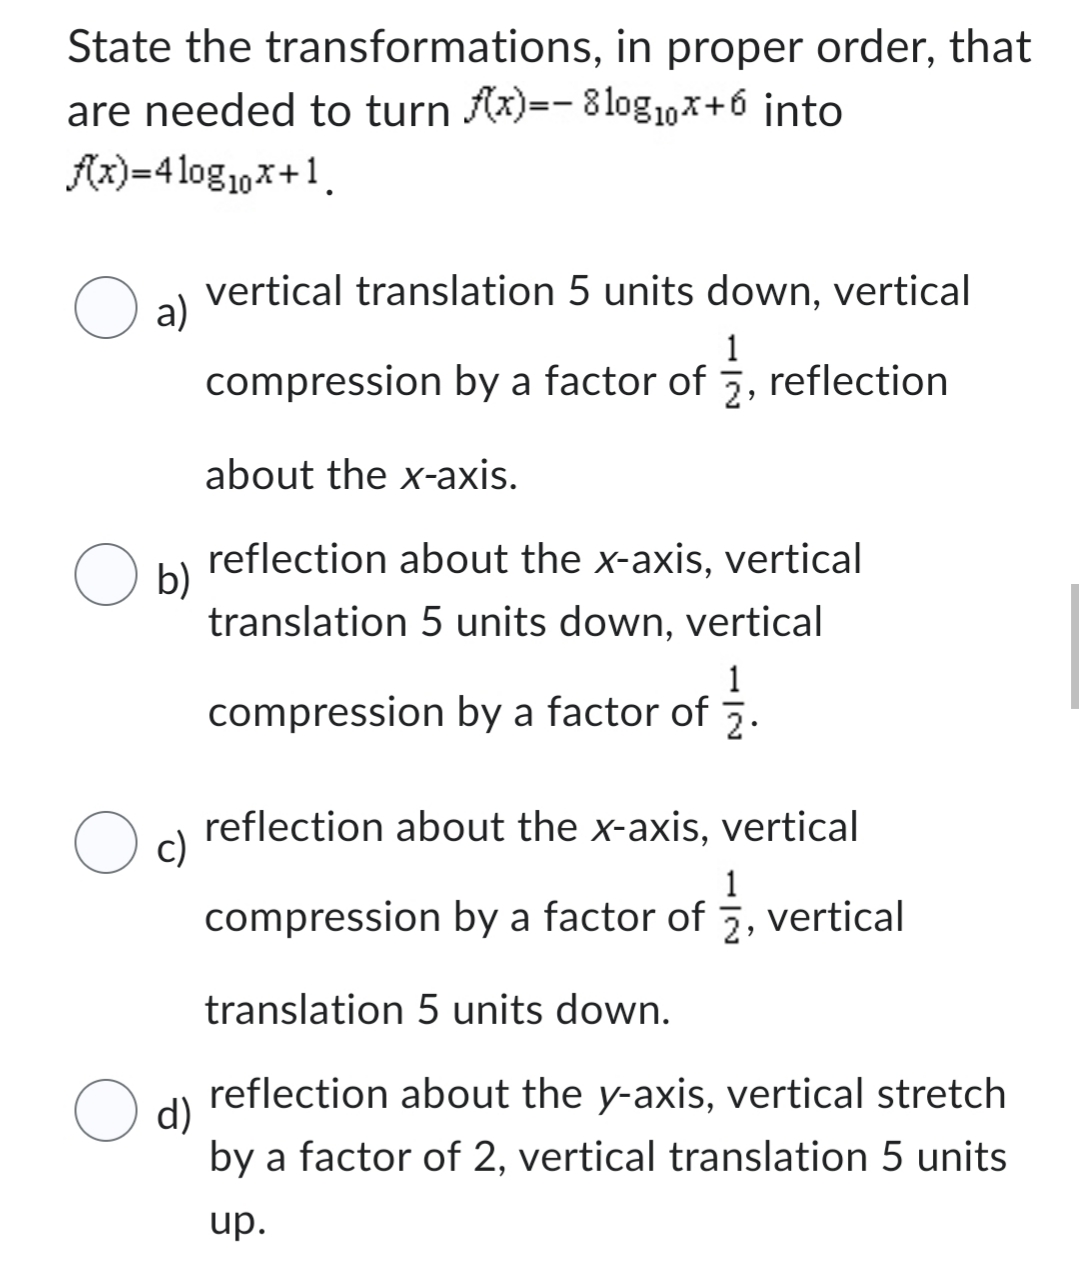 State the transformations, in proper order, that
are needed to turn f(x)=- 810g10x+6 into
f(x)=410g₁10x+1.
O a)
vertical translation 5 units down, vertical
1
compression by a factor of , reflection
about the x-axis.
reflection about the x-axis, vertical
translation 5 units down, vertical
1
compression by a factor of .
reflection about the x-axis, vertical
1
compression by a factor of , vertical
translation 5 units down.
d)
reflection about the y-axis, vertical stretch
by a factor of 2, vertical translation 5 units
up.
O b)
O c)